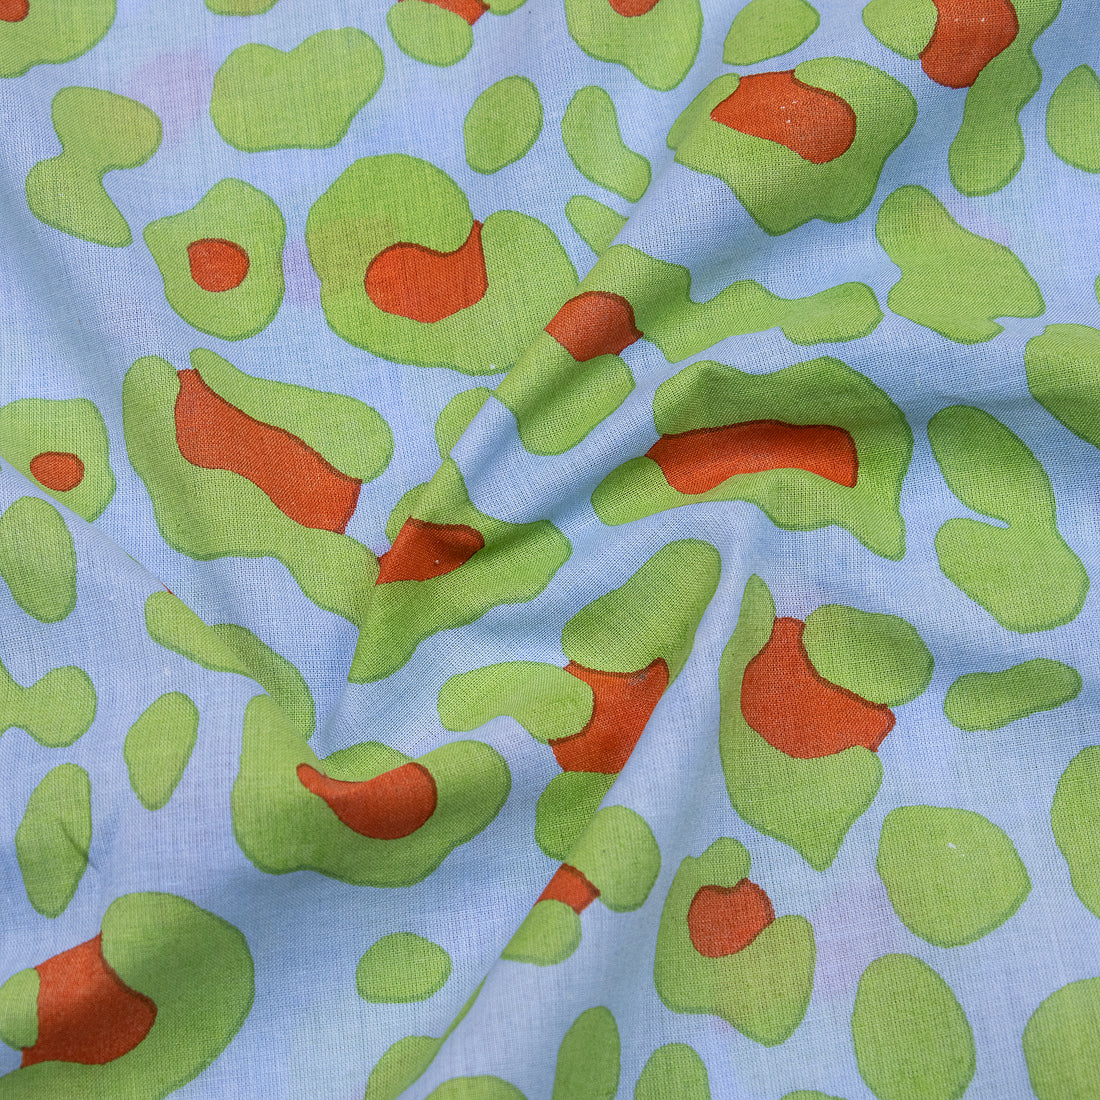 Abstract Print Soft Cotton Running Fabric